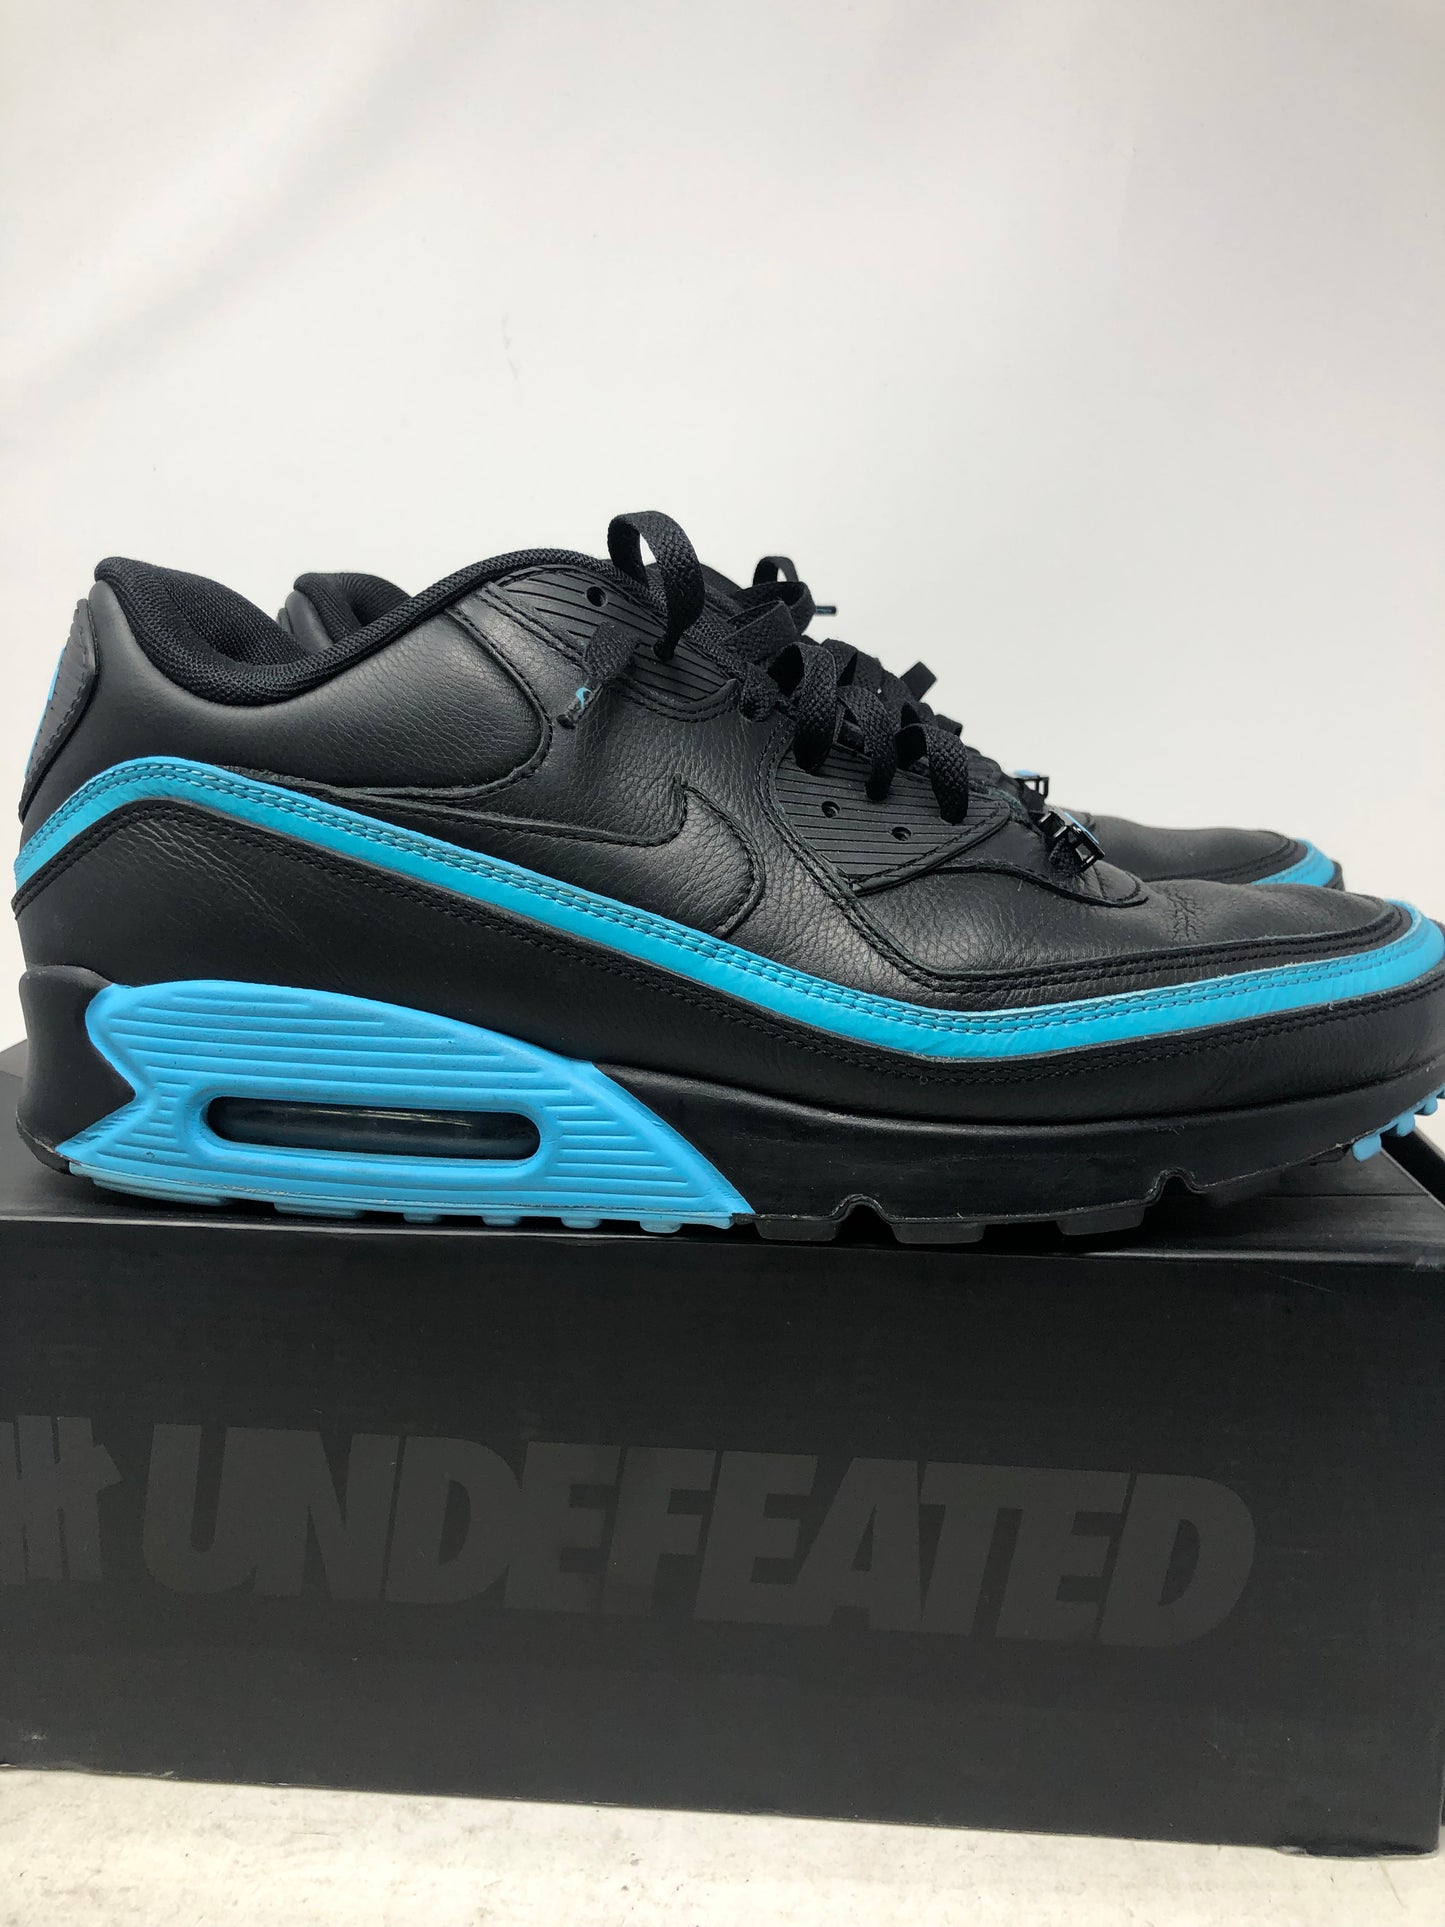 Preowned Nike Air Max 90 x Undefeated Blue Fury Sz 13